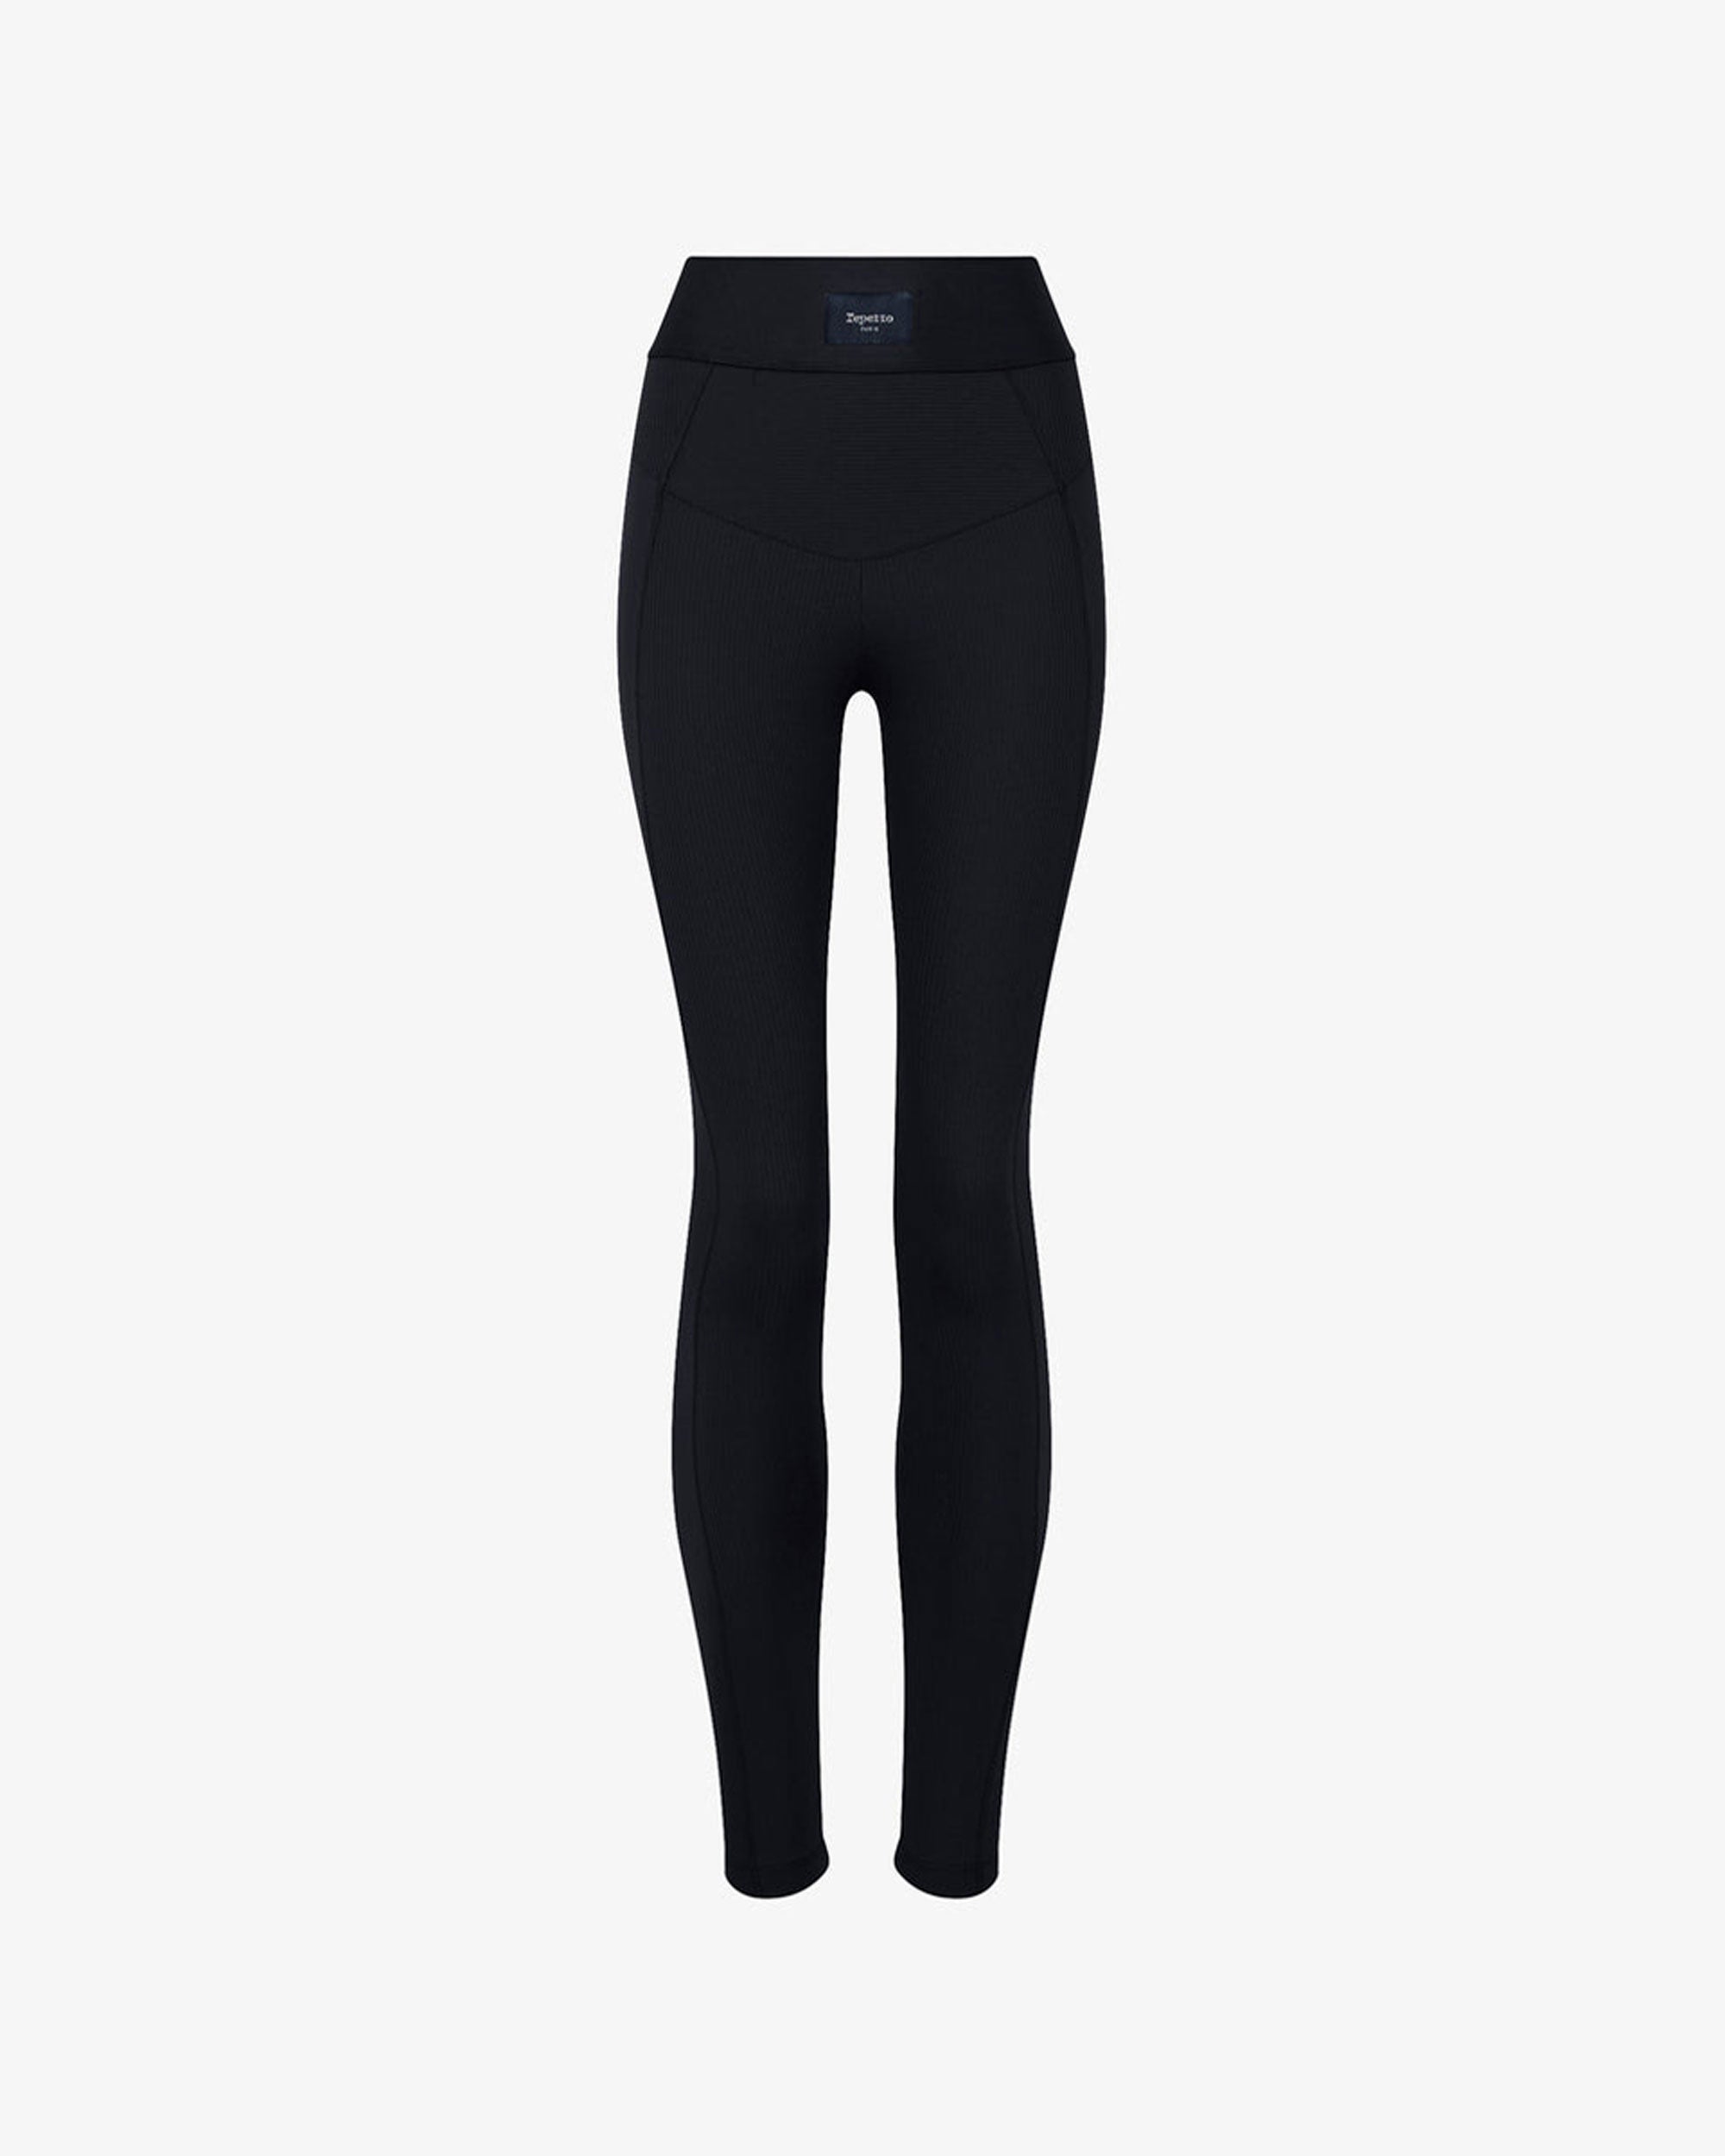 Crop top and Women's Sportswear Leggings in black microfiber with push-up,  supportive, ribbed modeling effect, made in Italy.